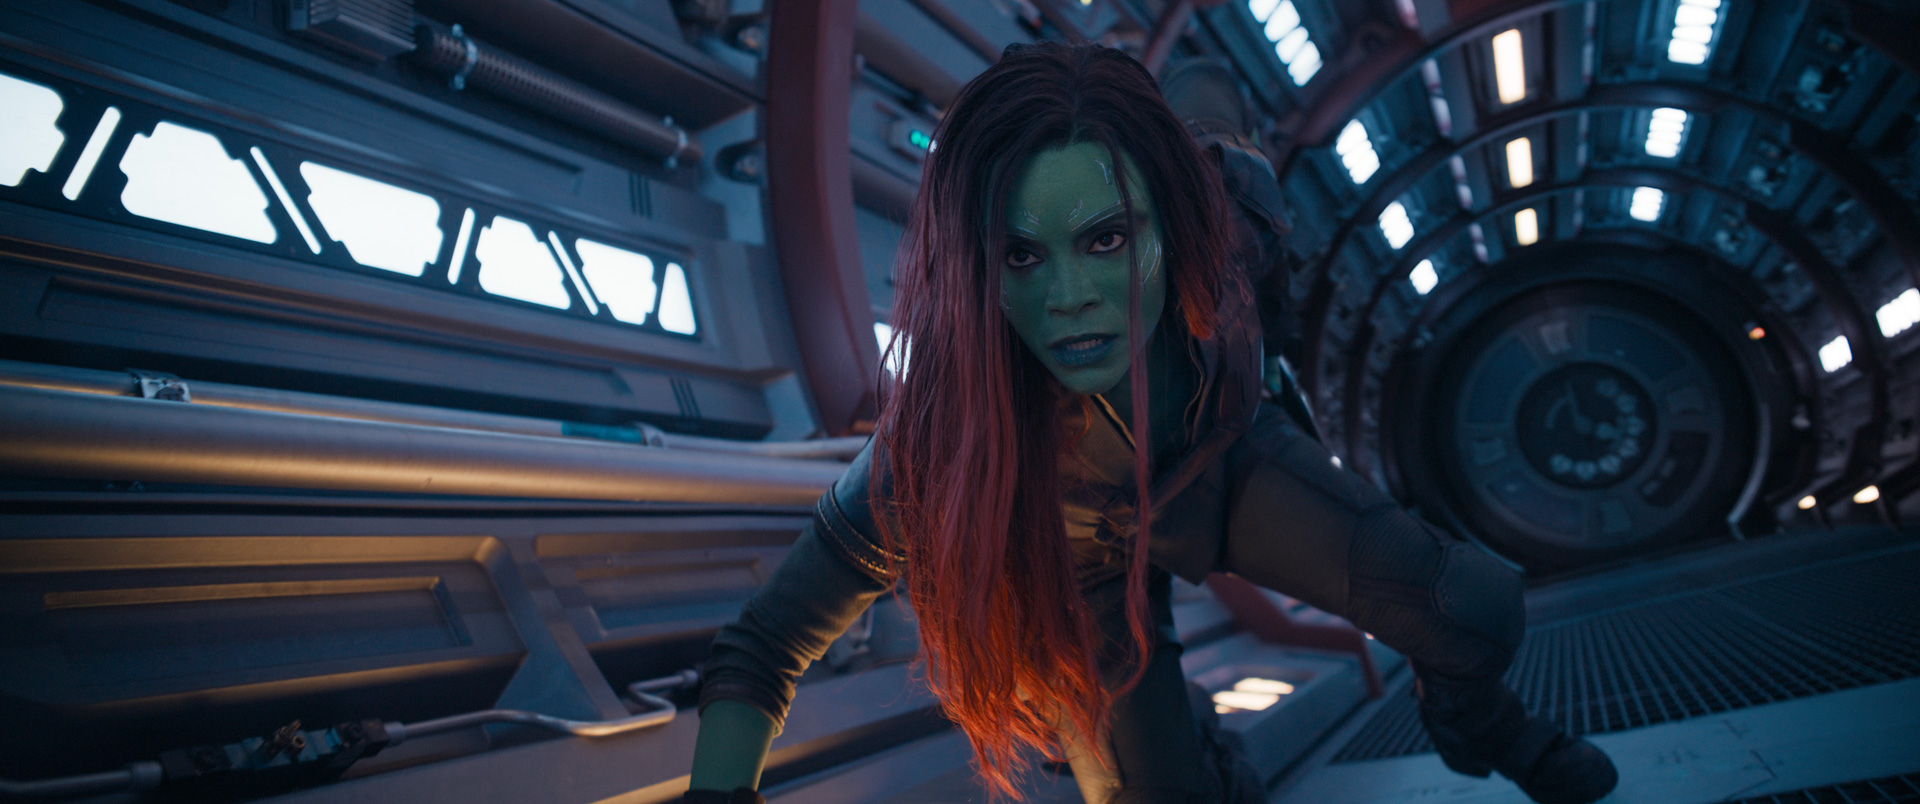 An image of Zoe Saldaña as the green alien Gamora in Guardians of the Galaxy Vol. 3. In the halls of a spaceship, she kneels on the ground and looks ahead. Her left arm reaches for a weapon holstered at her hip.